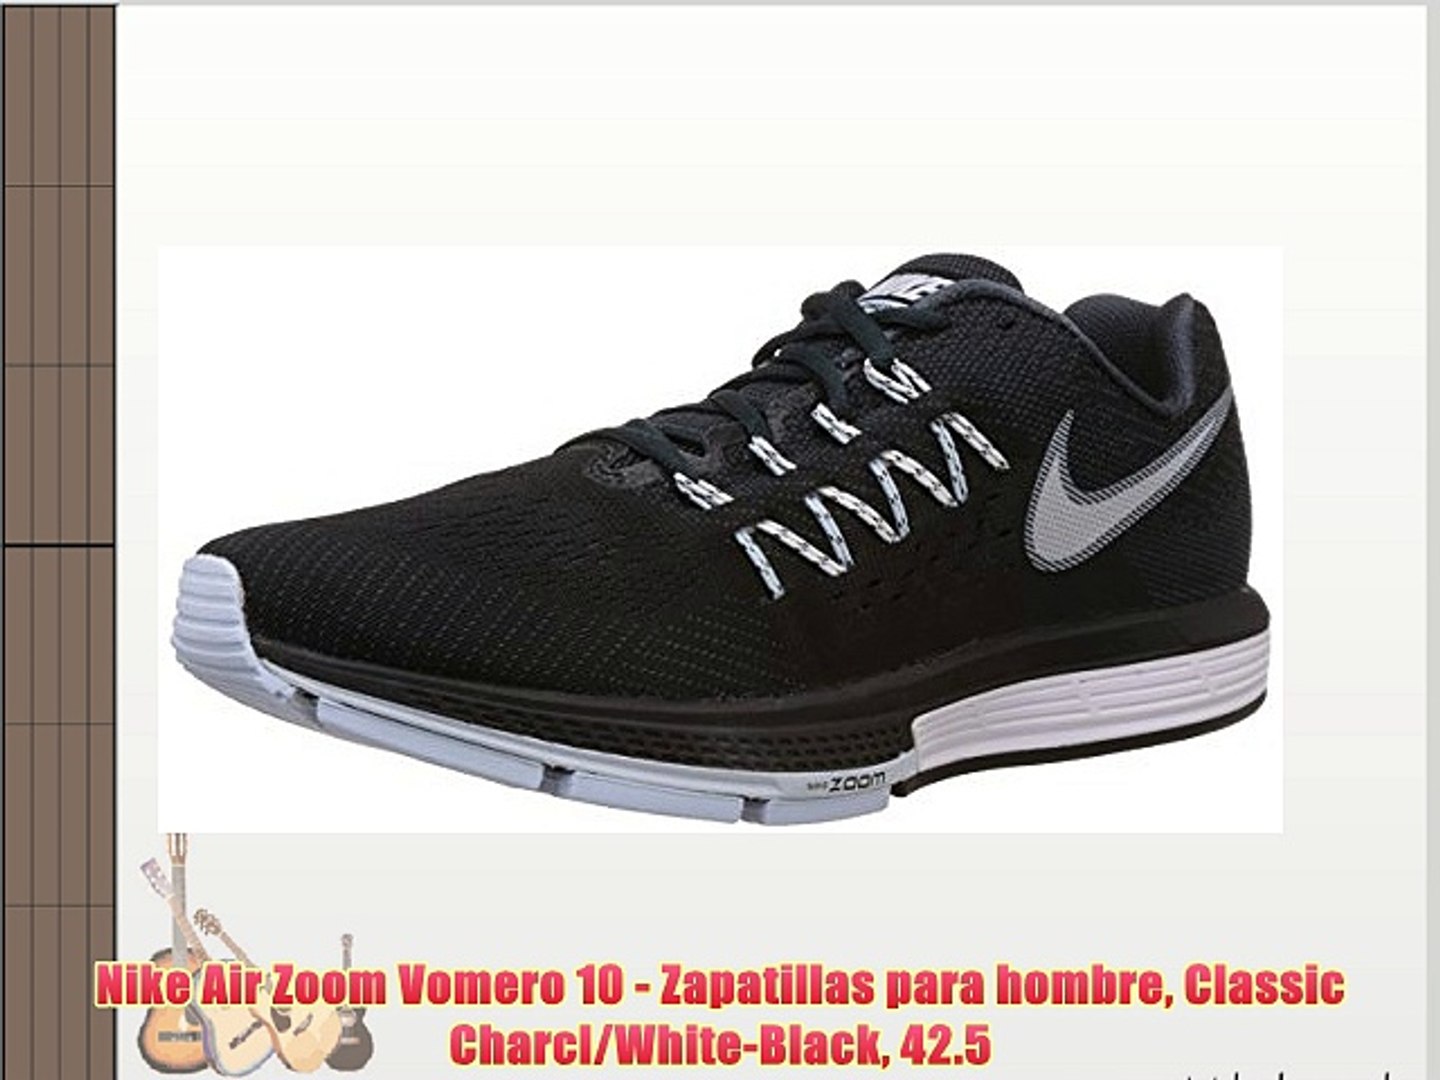 Nike Air Zoom Vomero 10 - Zapatillas para hombre Classic Charcl/White-Black  42.5 - video dailymotion